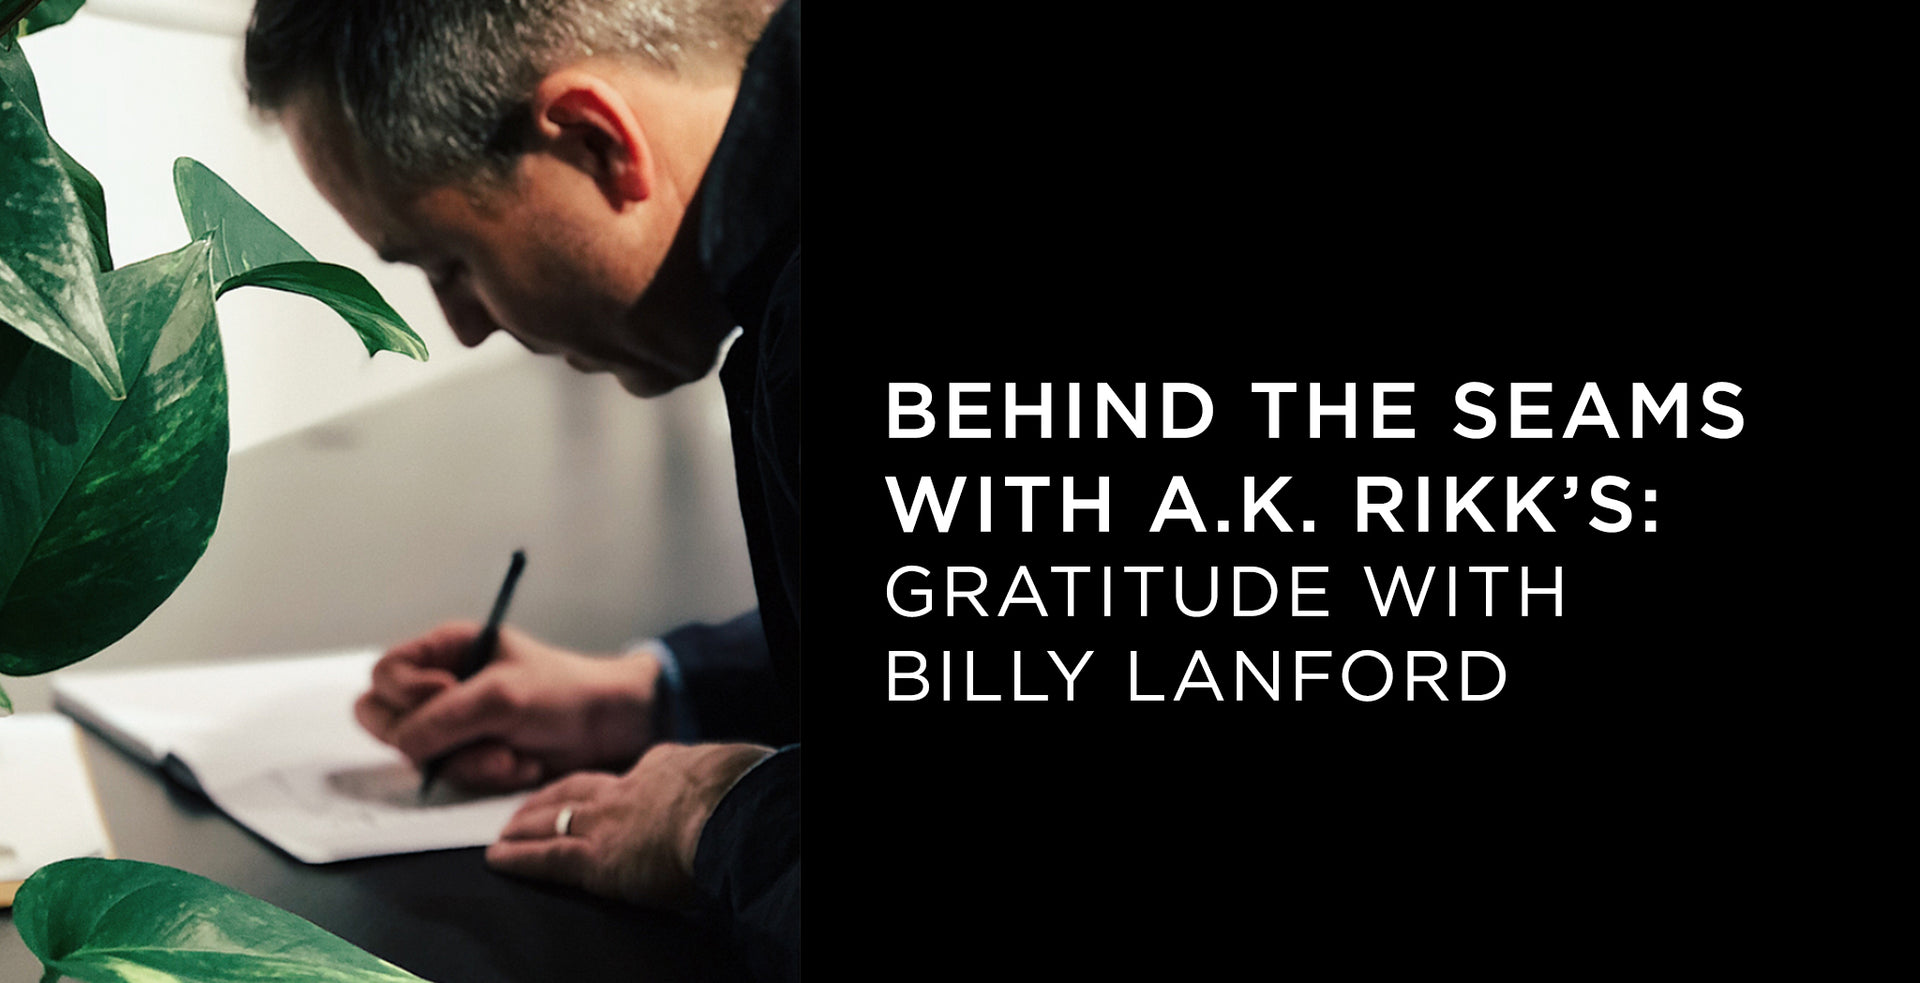 Behind the Seams with A.K. Rikk's: Gratitude with Billy Lanford